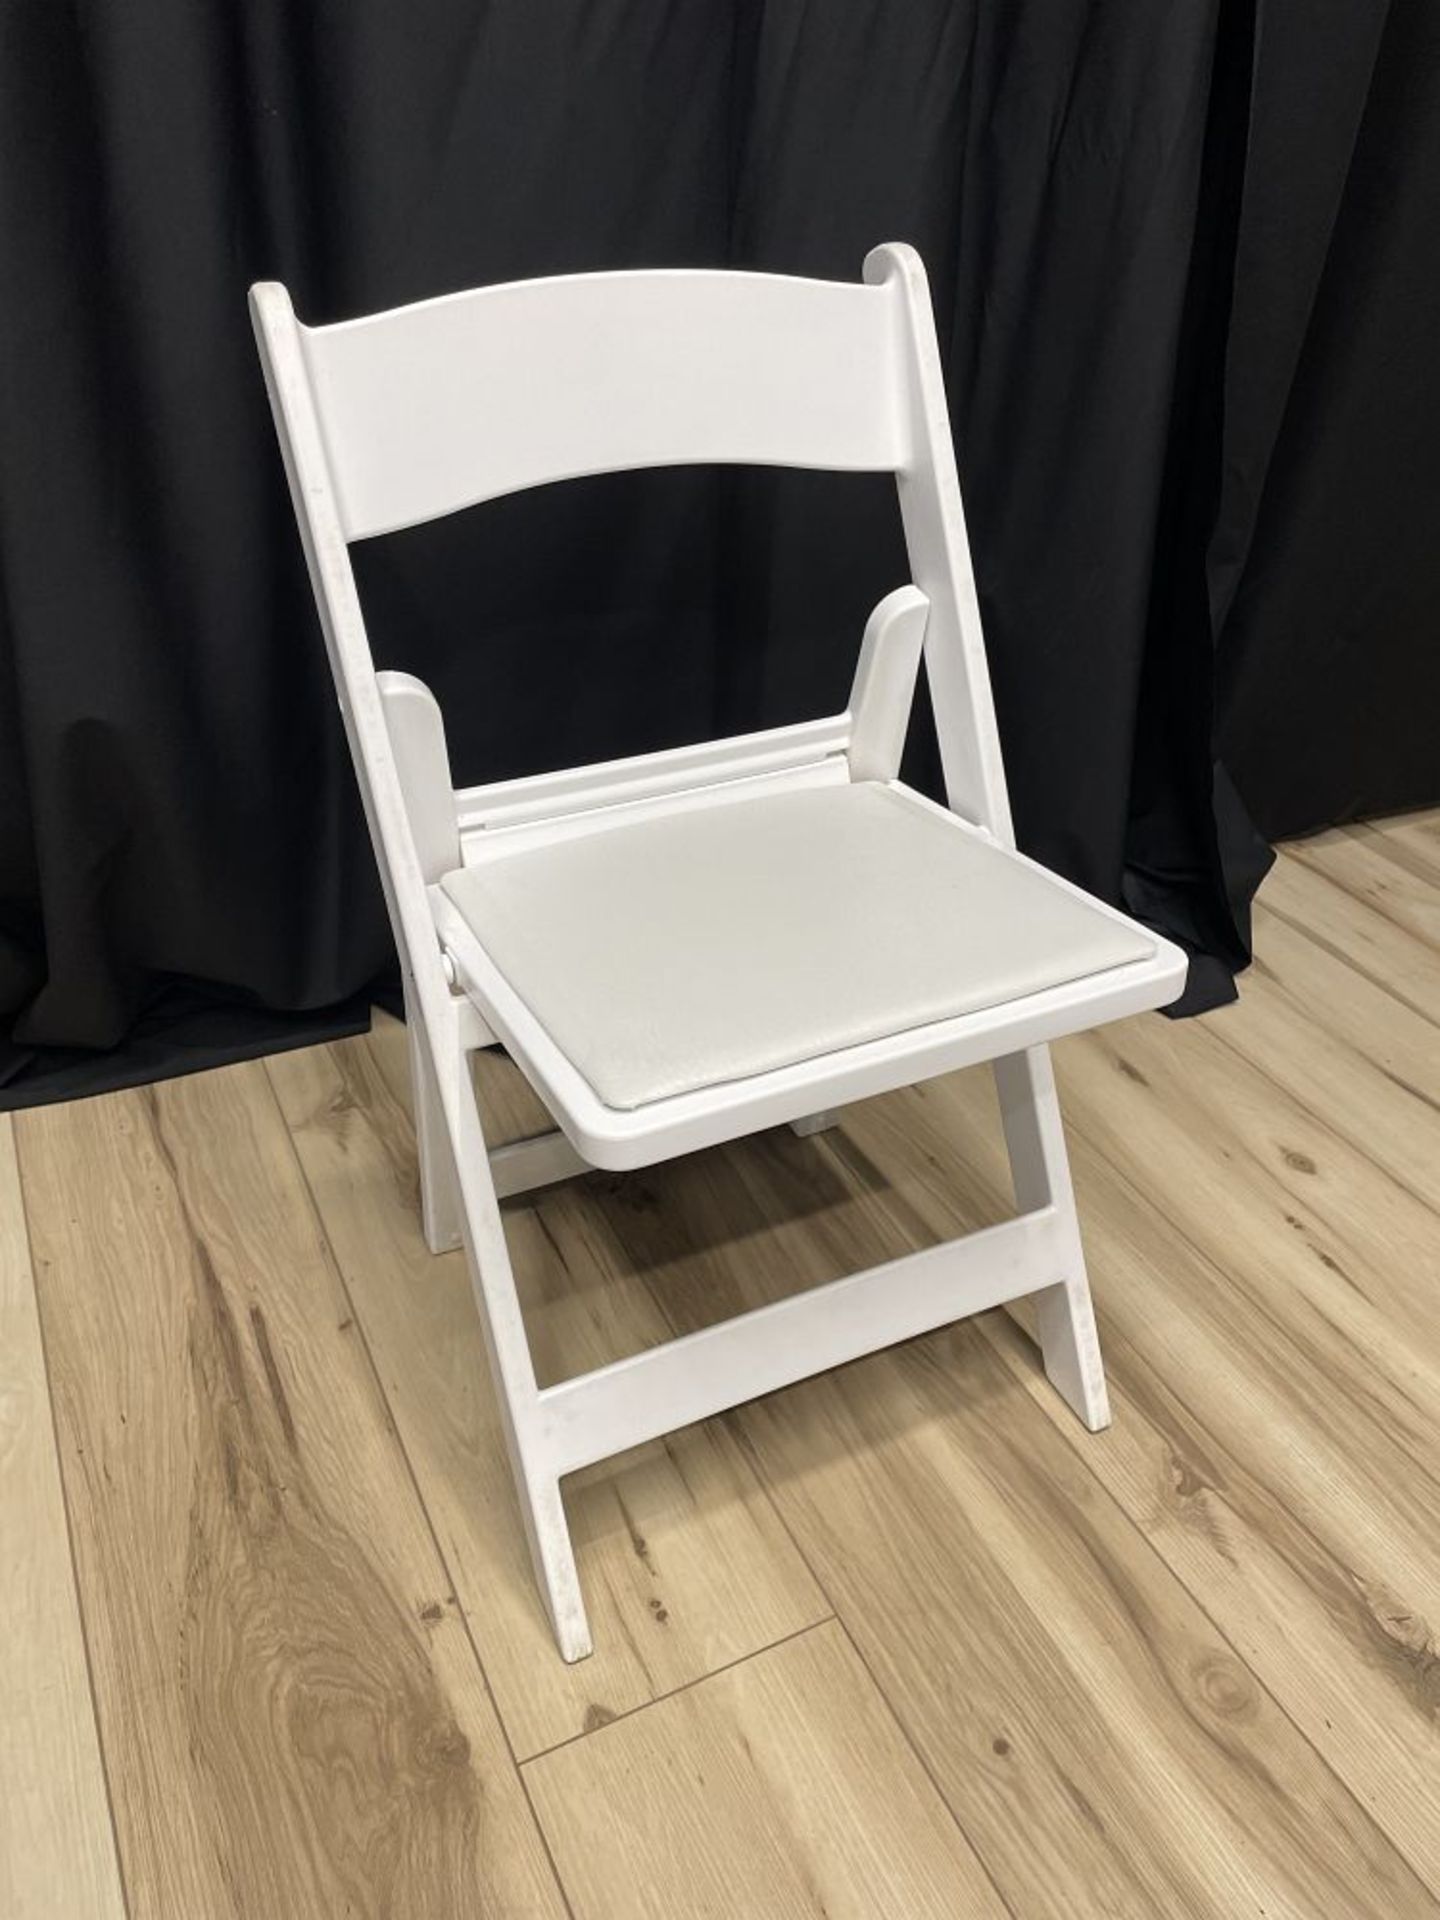 CHAIR - PALMER SNYDER, WHITE RESIN, PADDED SEAT